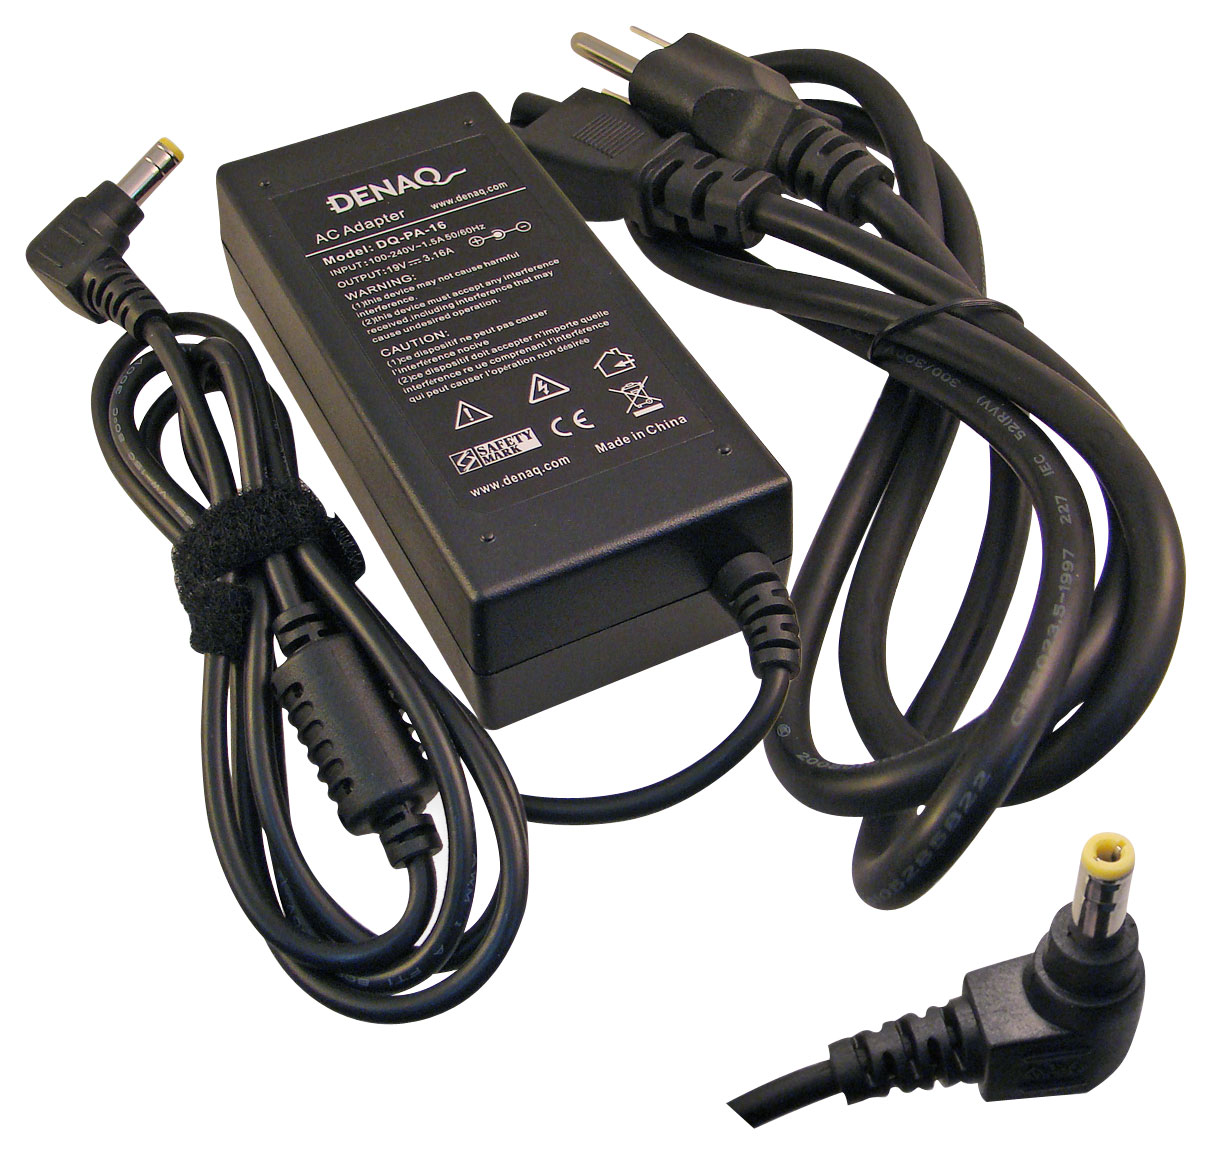 DENAQ AC Power Adapter and Charger for Select Dell Inspiron and Latitude  Laptops Black DQ-PA-16-5525 - Best Buy